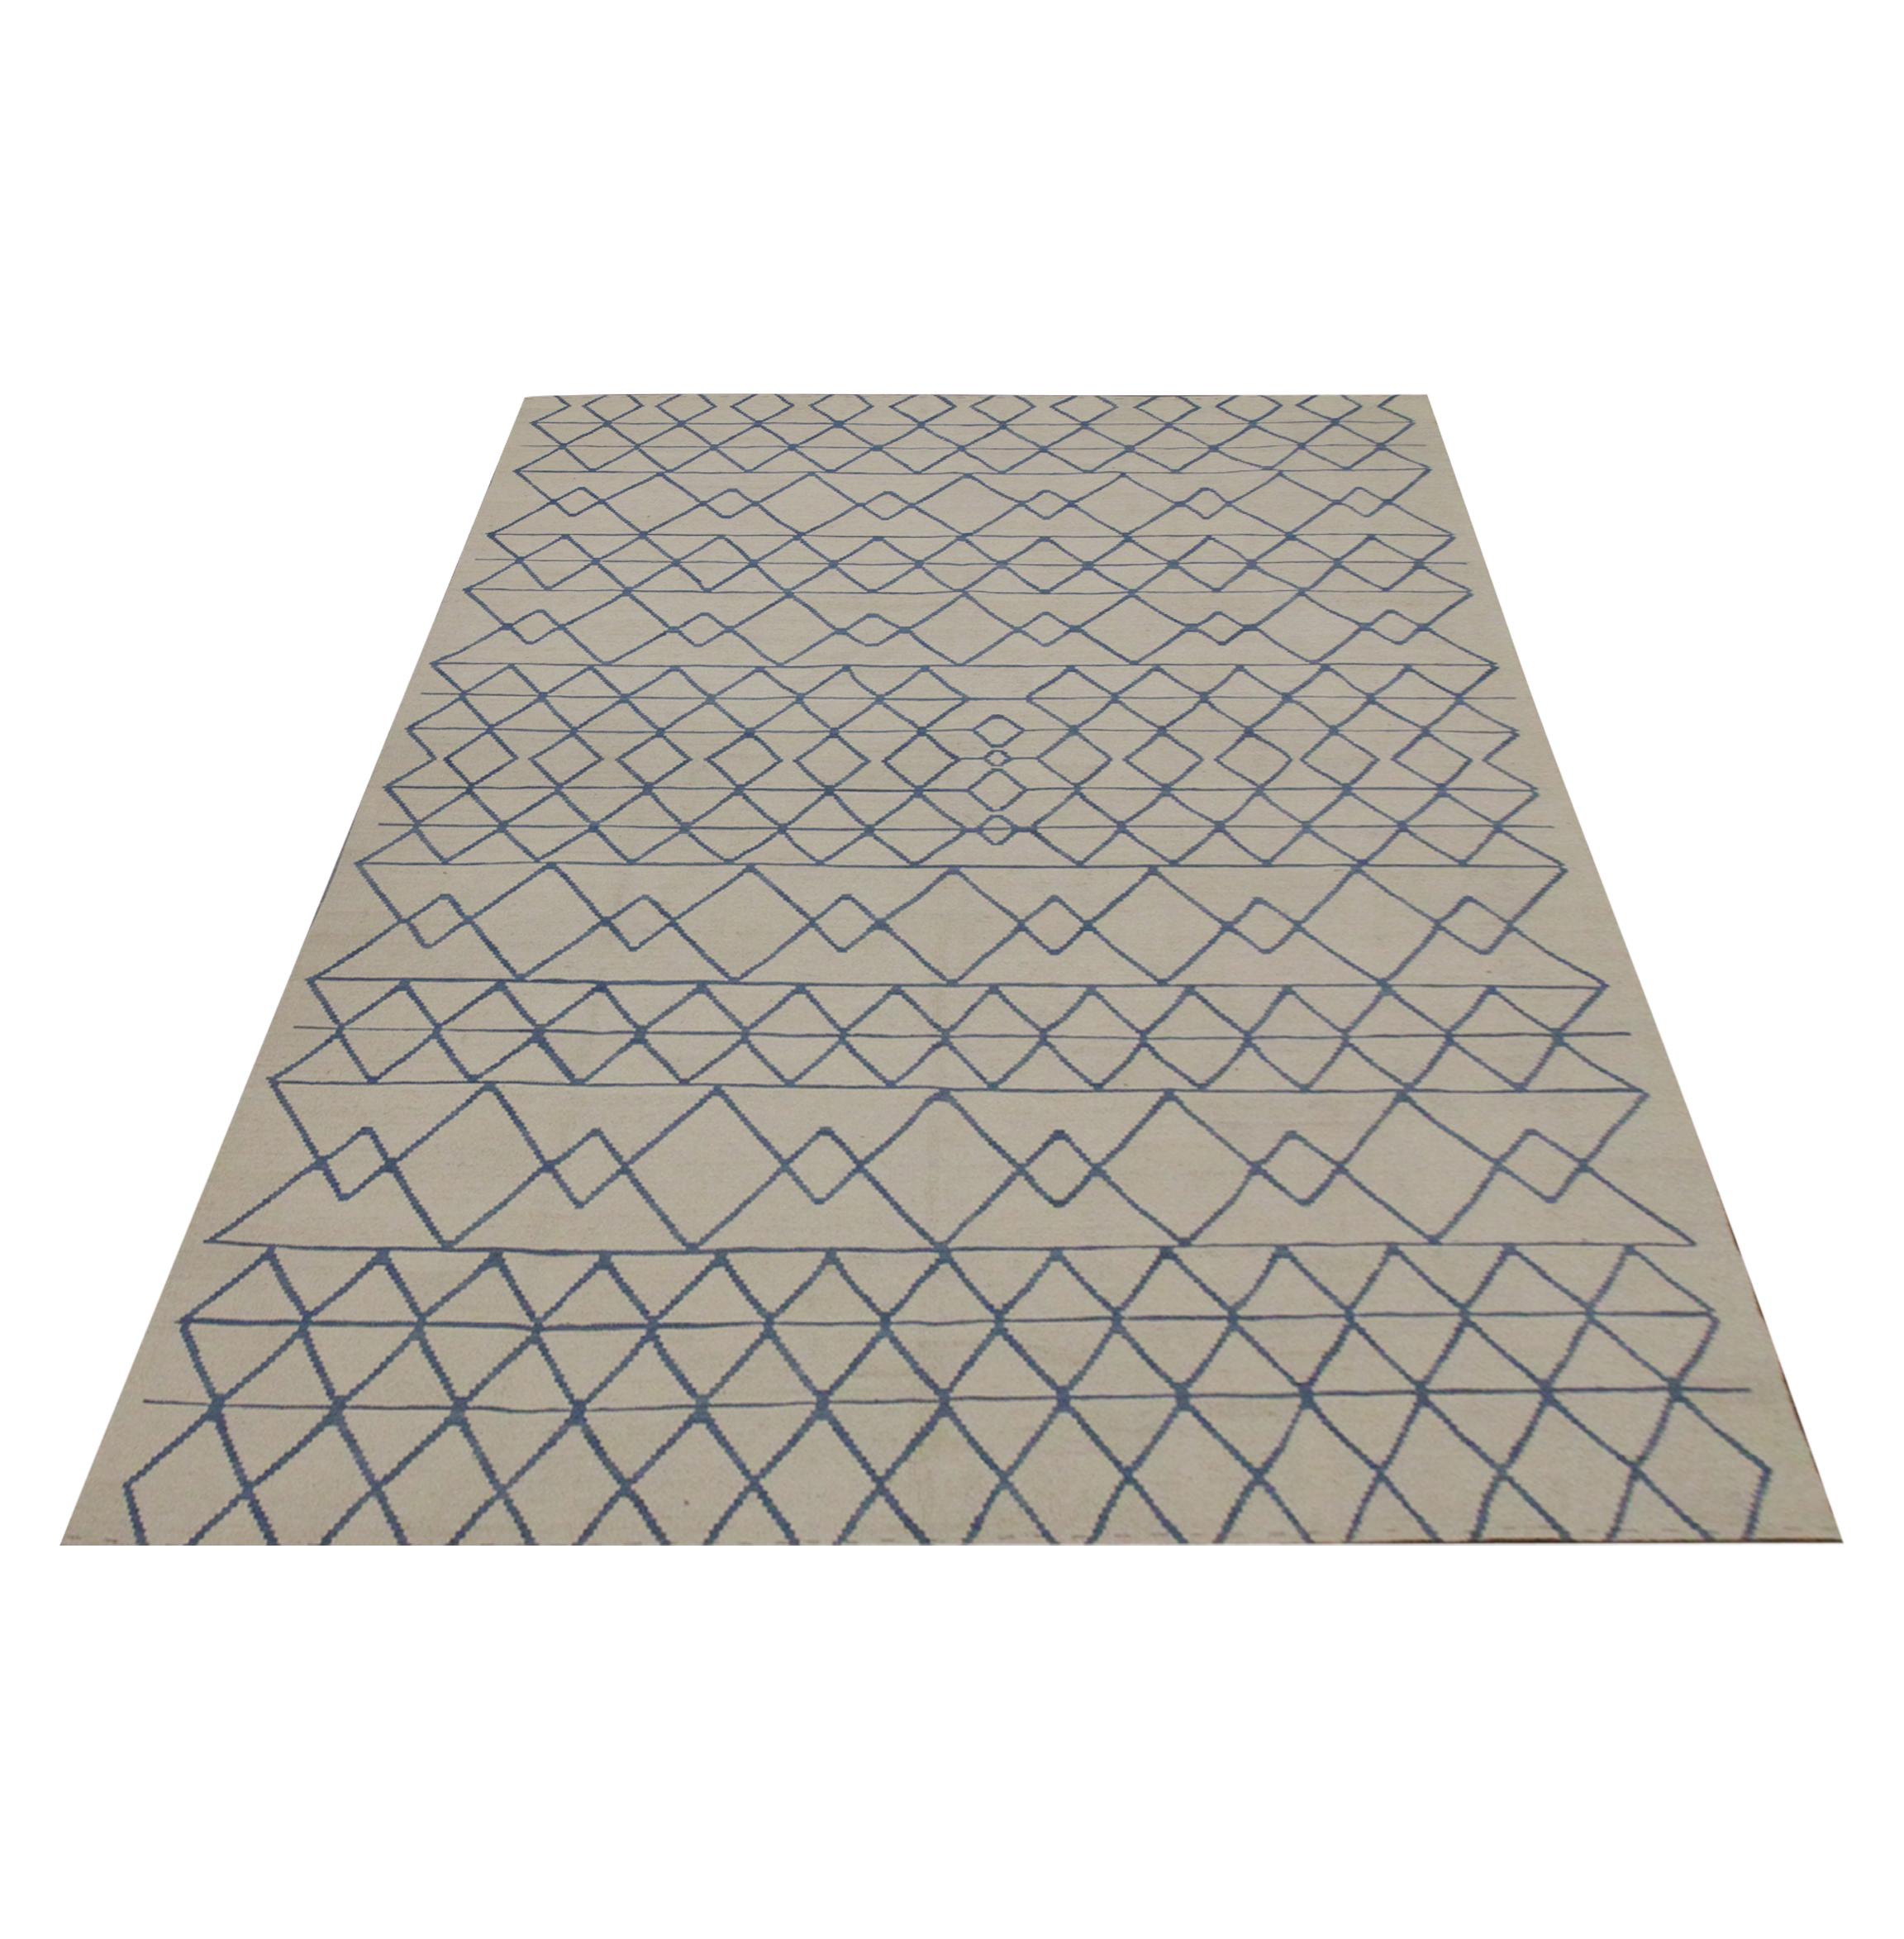 This fine wool Kilim is a New Modern Afghan area rug woven with a simple colour palette of cream and blue. The black accents make up the symmetrical geometric pattern, creating a bold eye-catching rug. Similar to Scandinavian design this carpet is